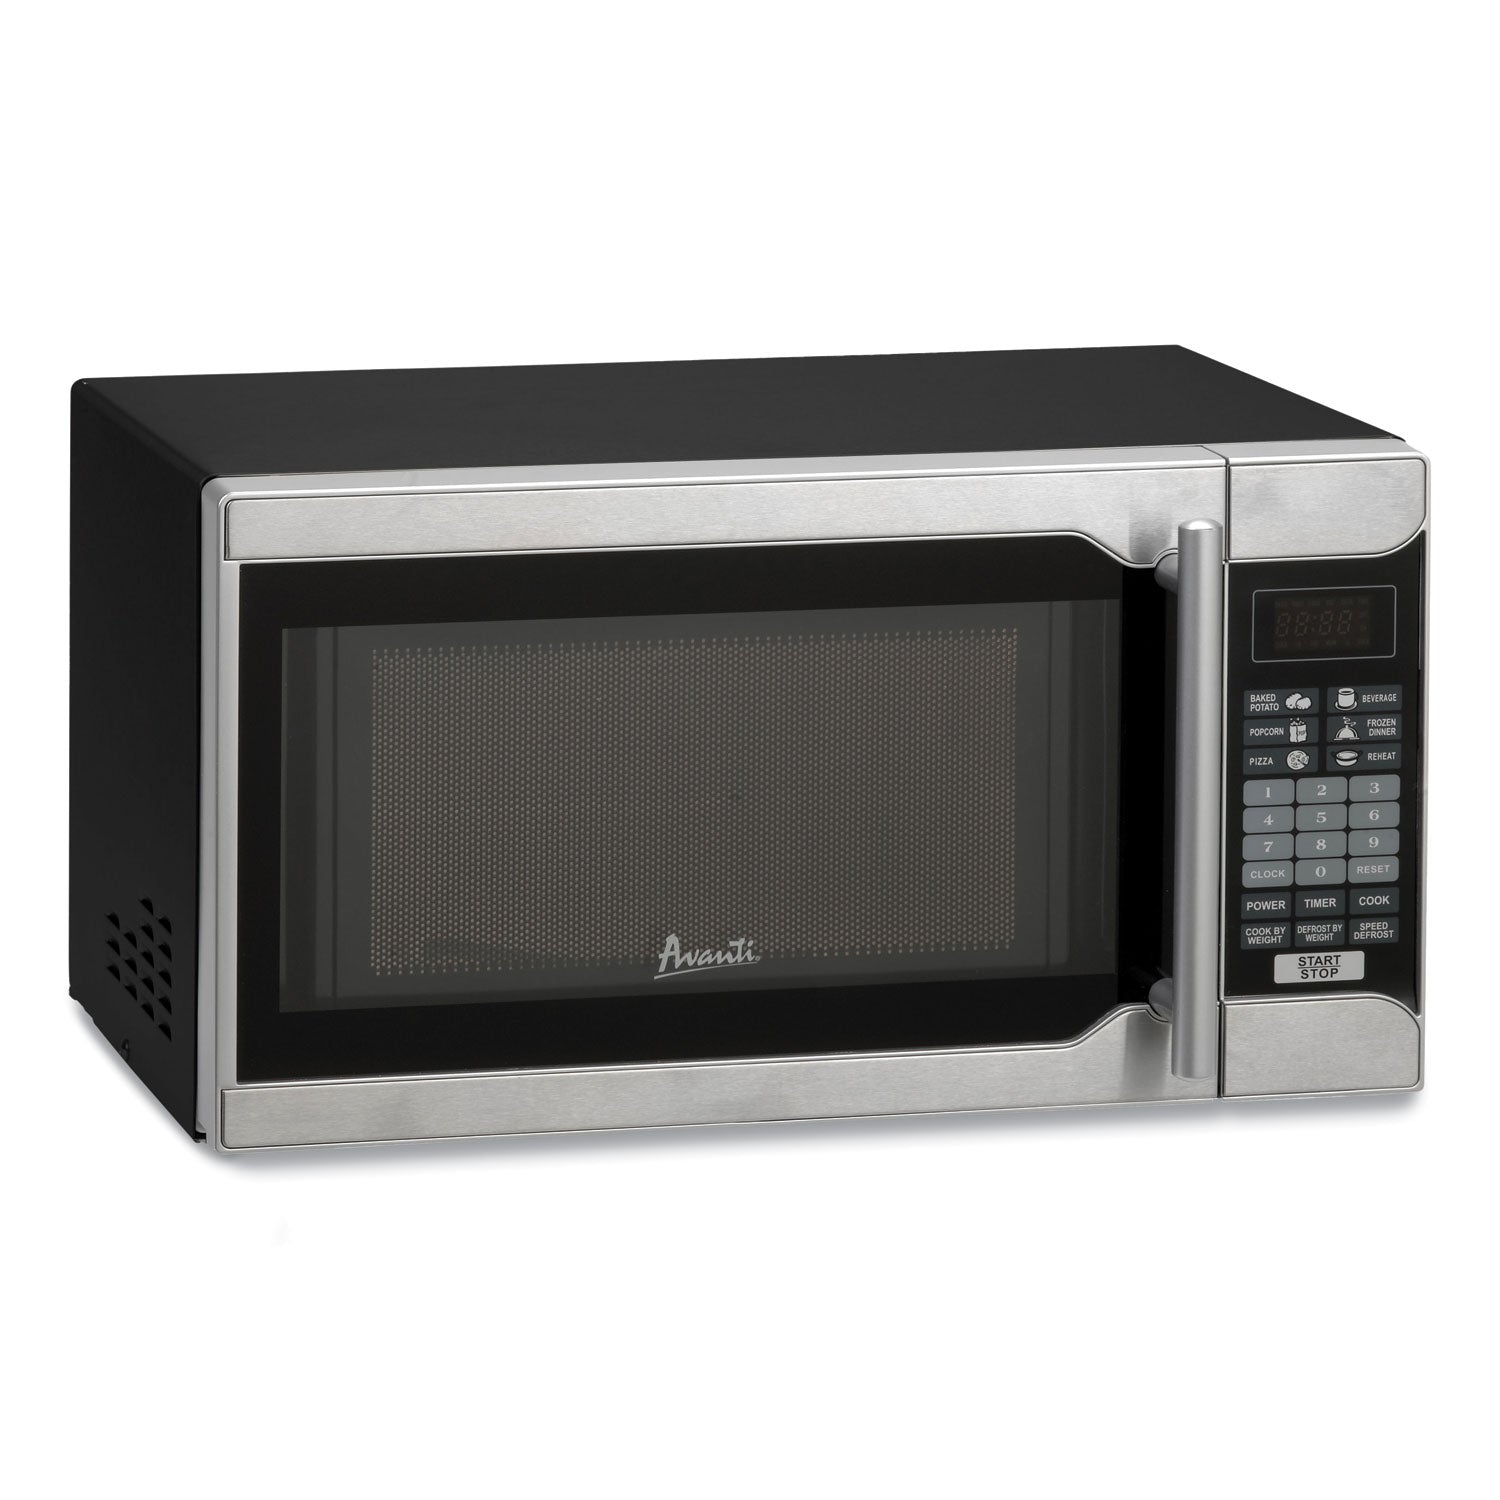 0.7 Cu.ft Capacity Microwave Oven, 700 Watts, Stainless Steel and Black, Sold as 1 Each - 2